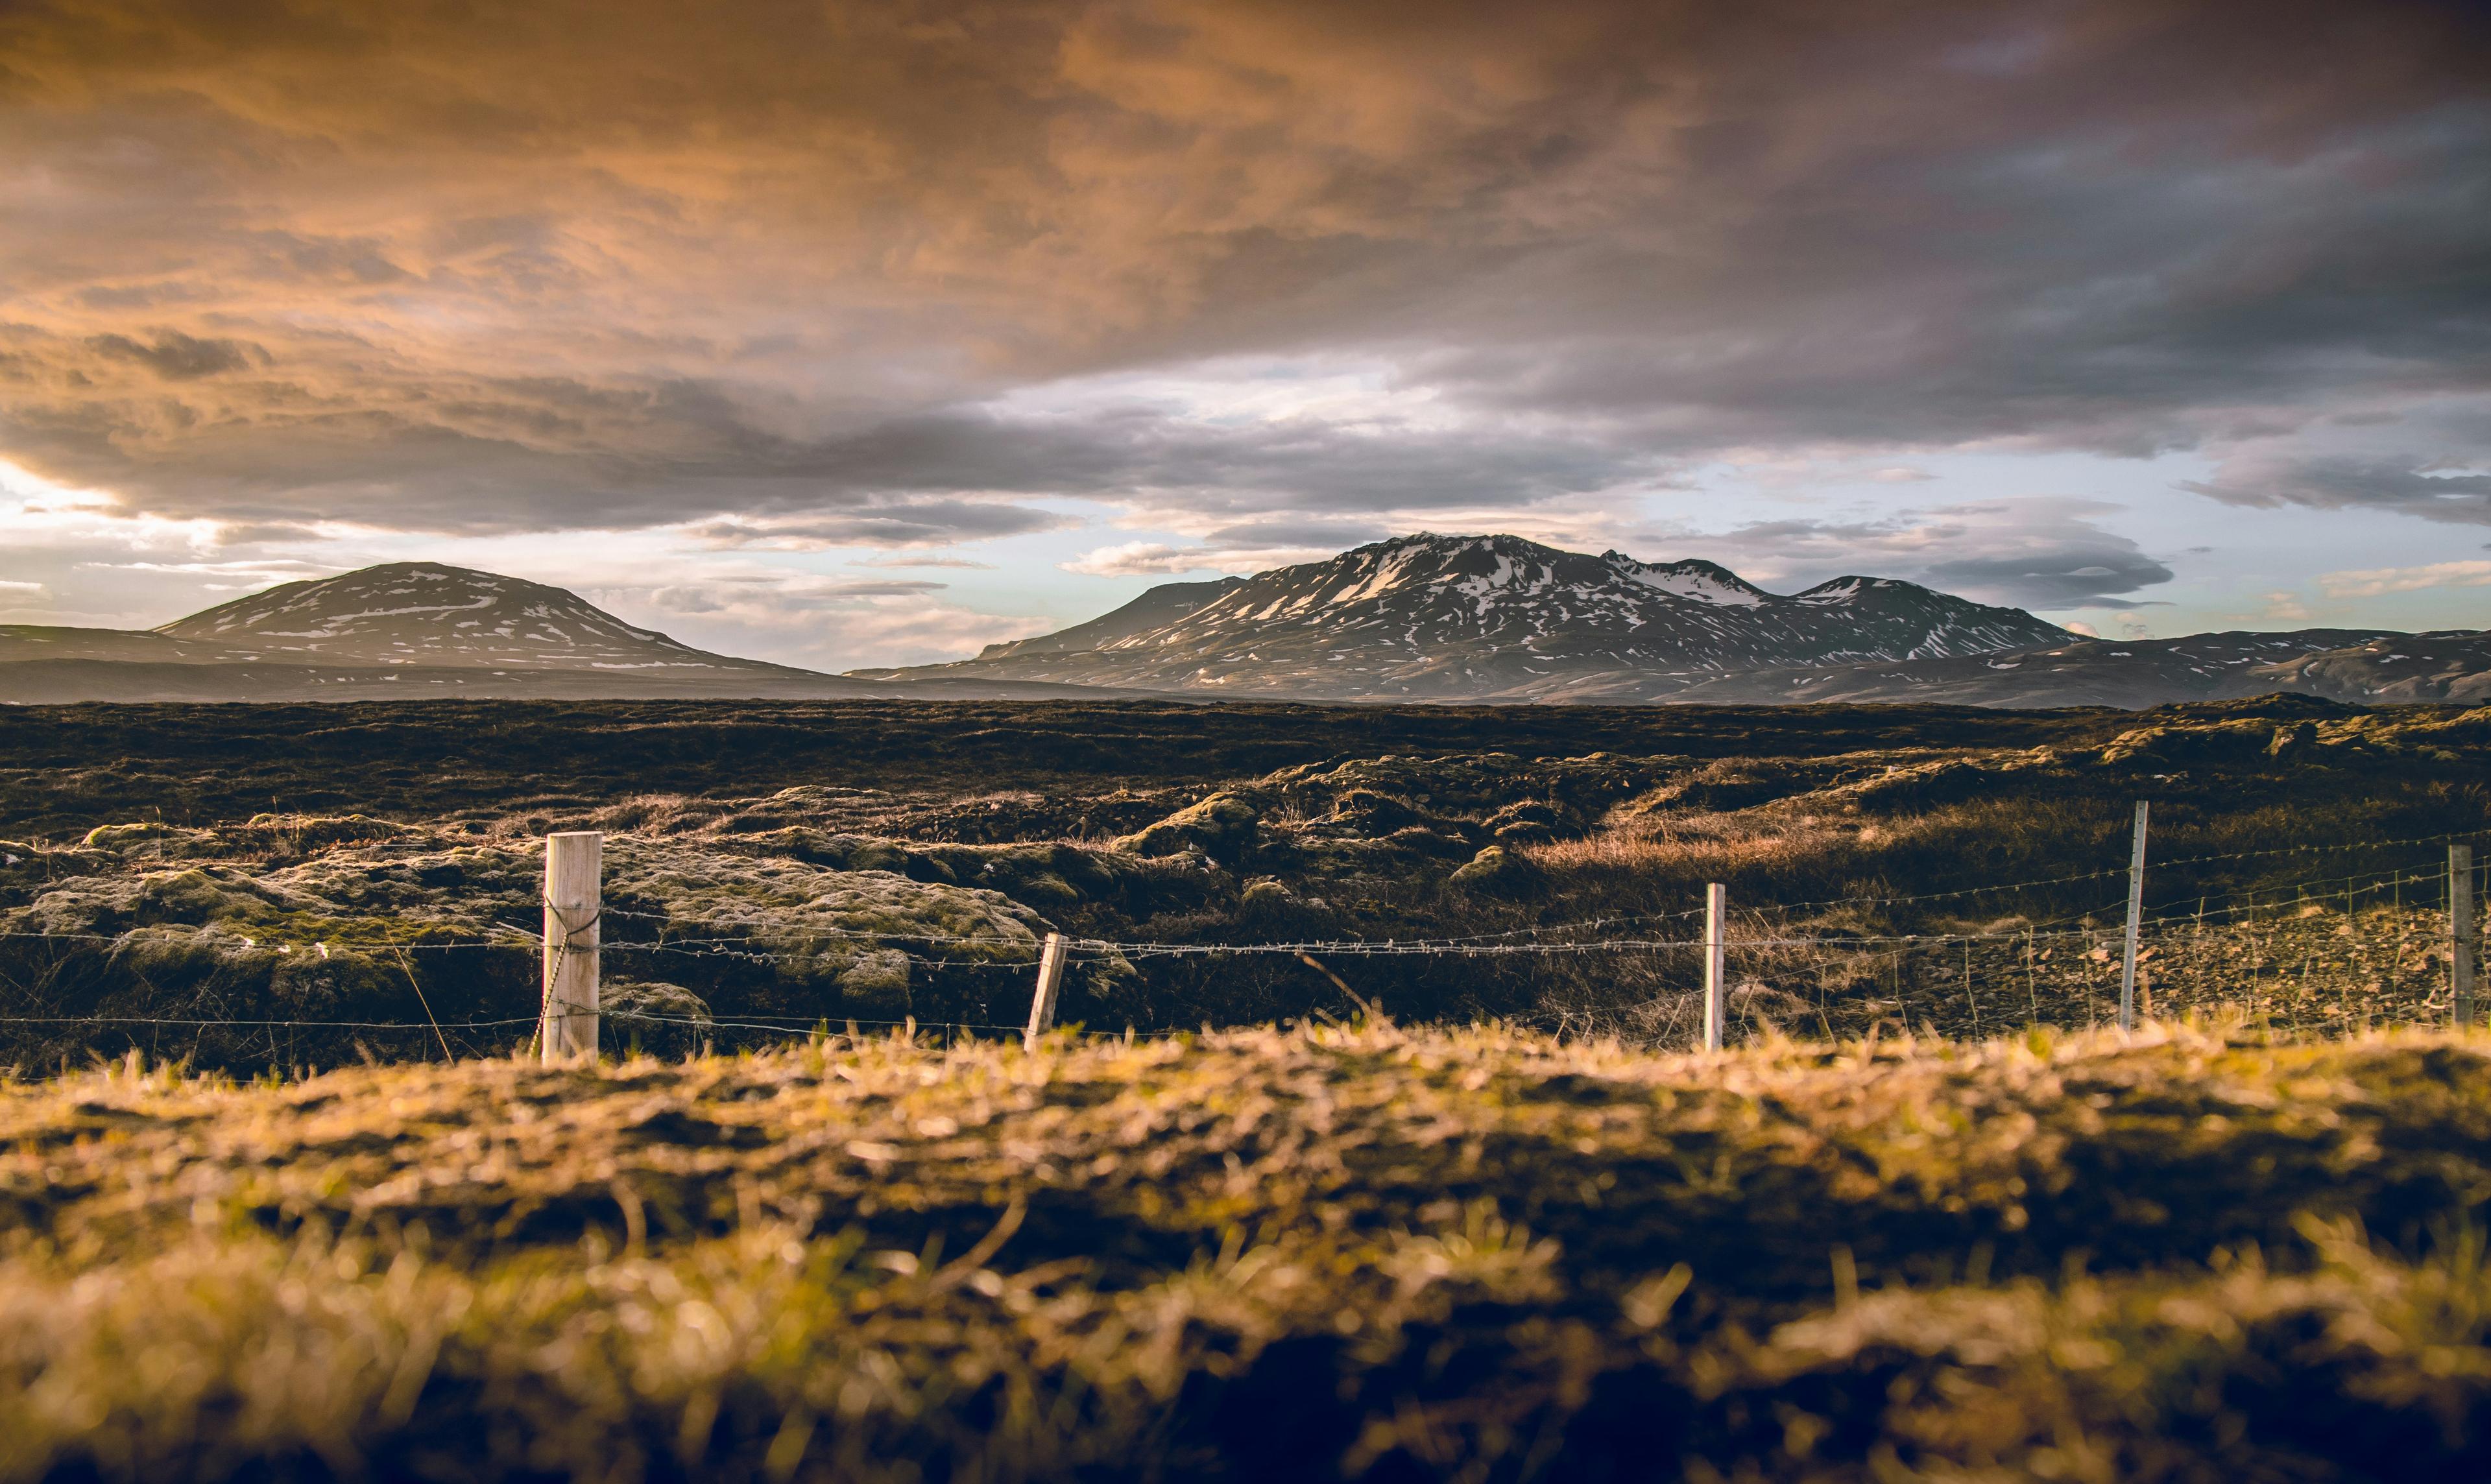 A moody sky looms over a rugged landscape with a fence in the foreground, leading the eye towards distant mountains bathed in the warm, golden light of a setting or rising sun.